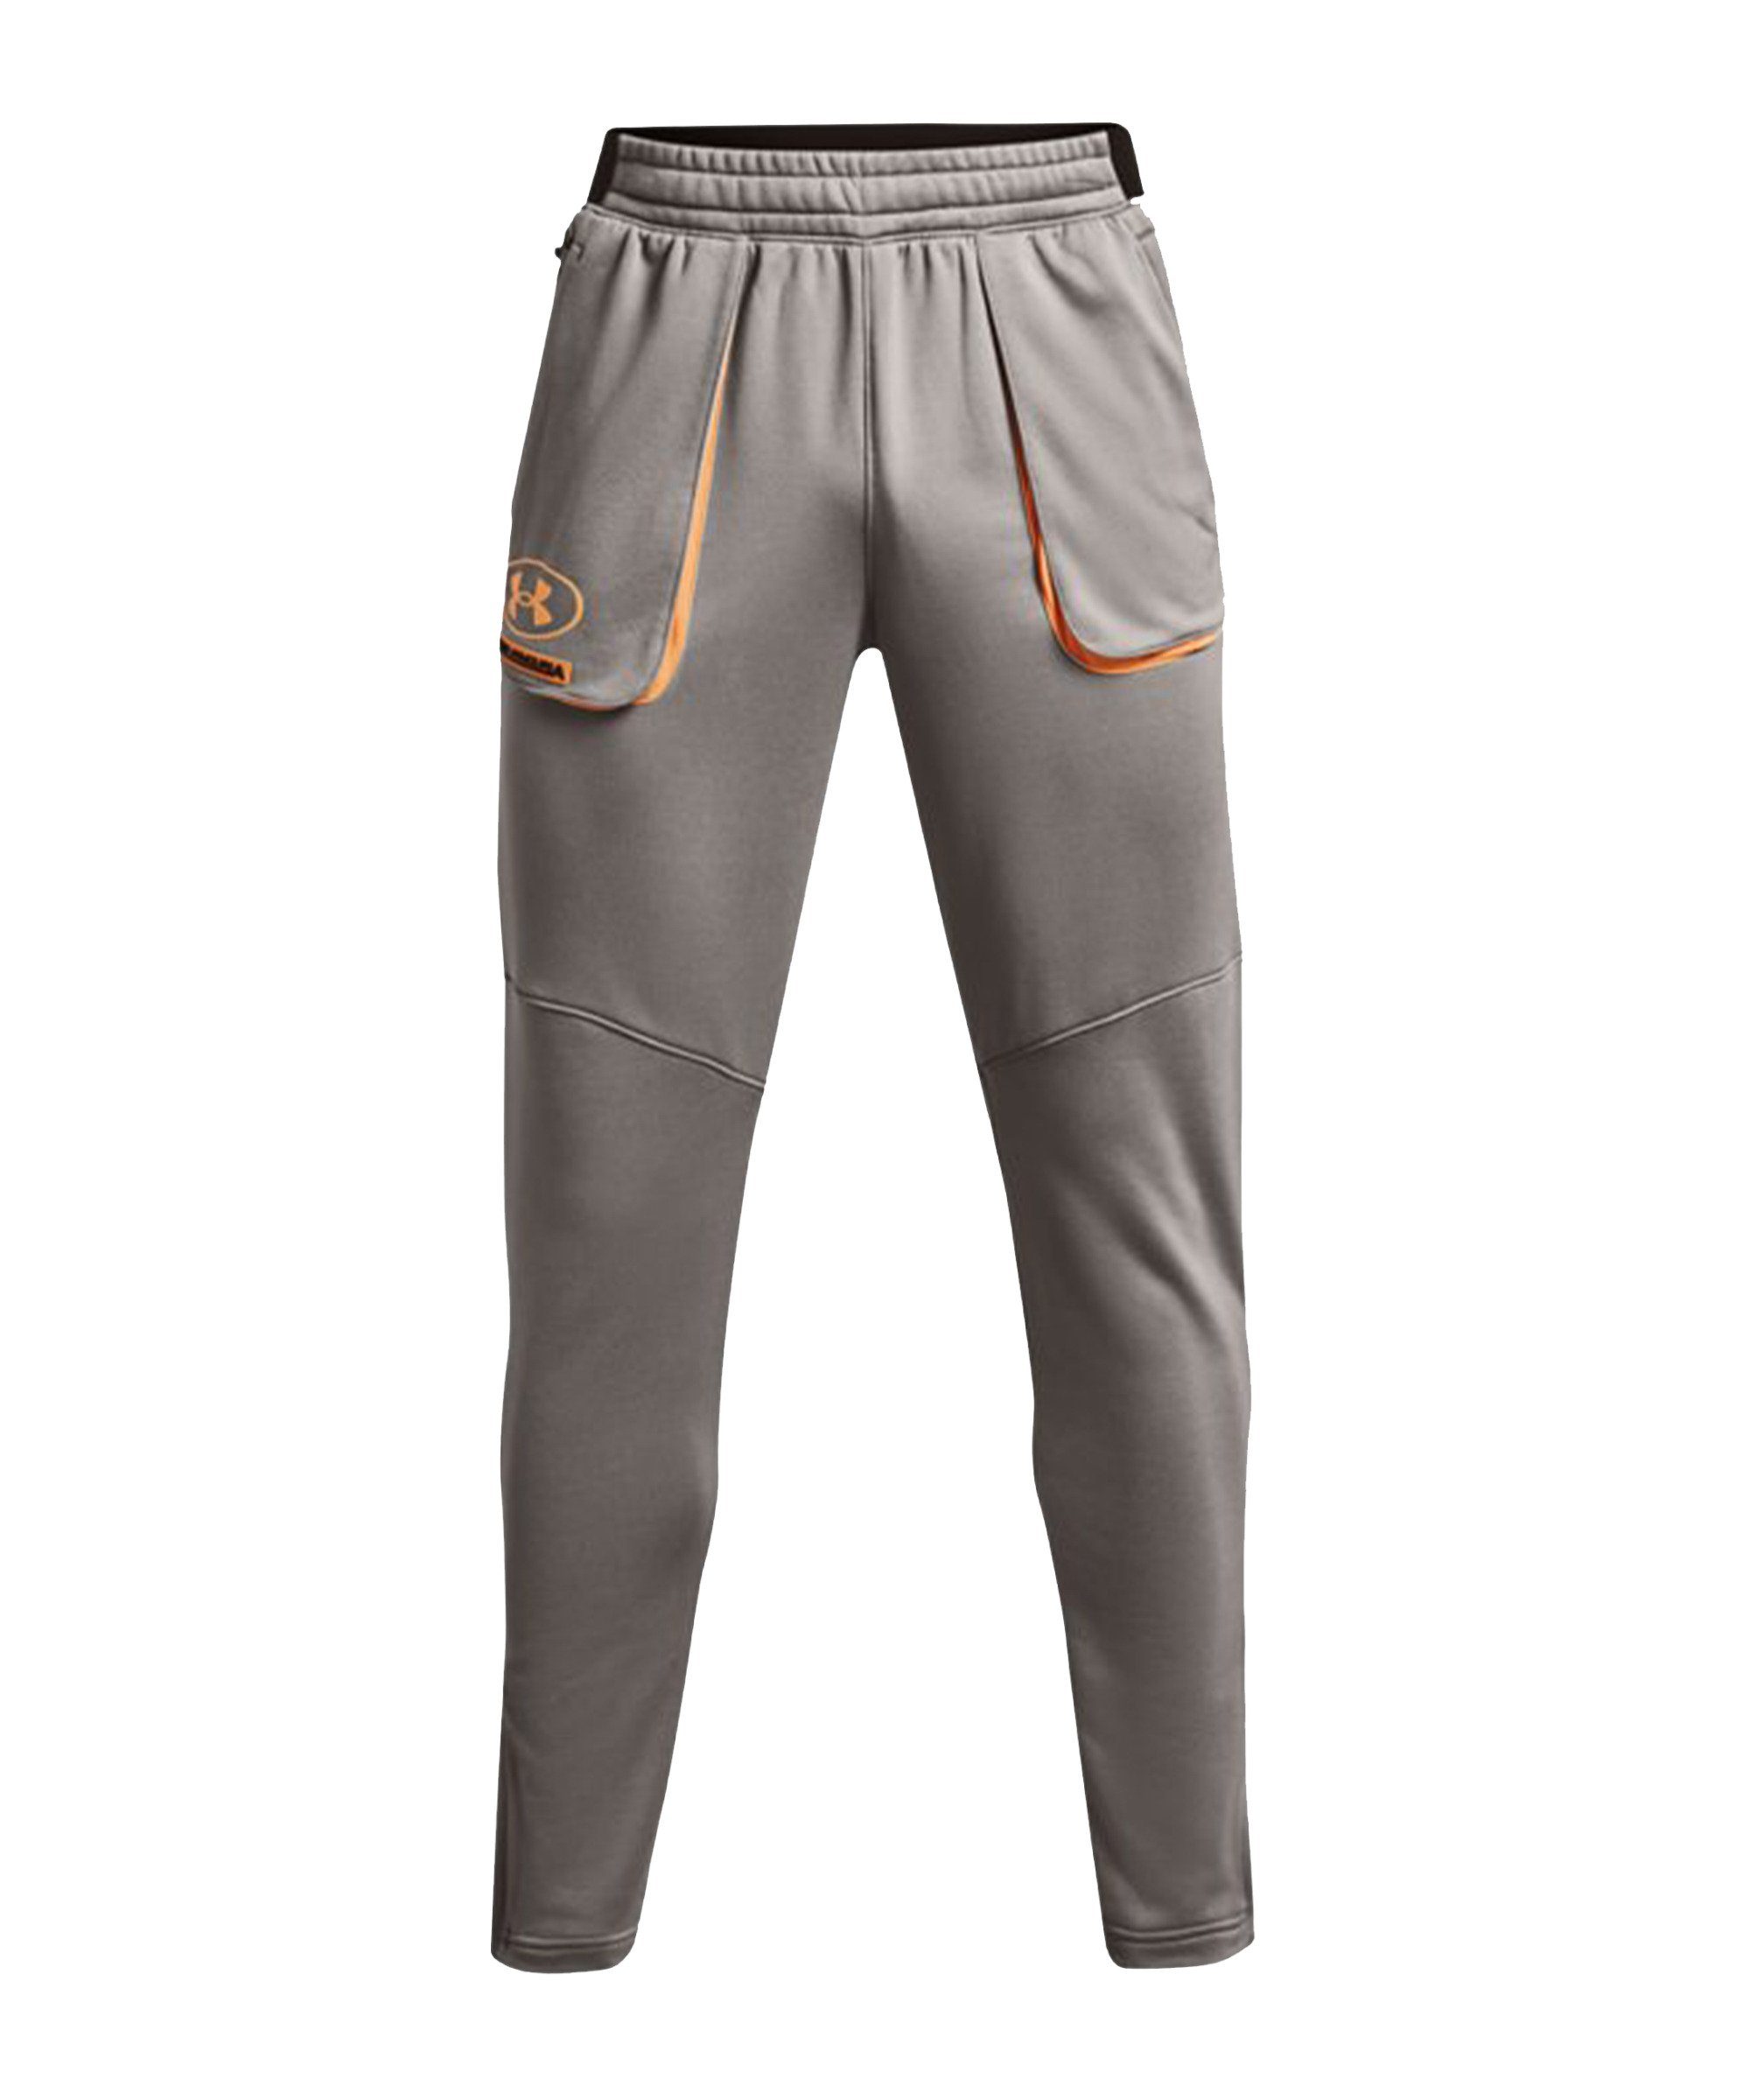 Under Armour® Sporthose French Terry Trainingshose